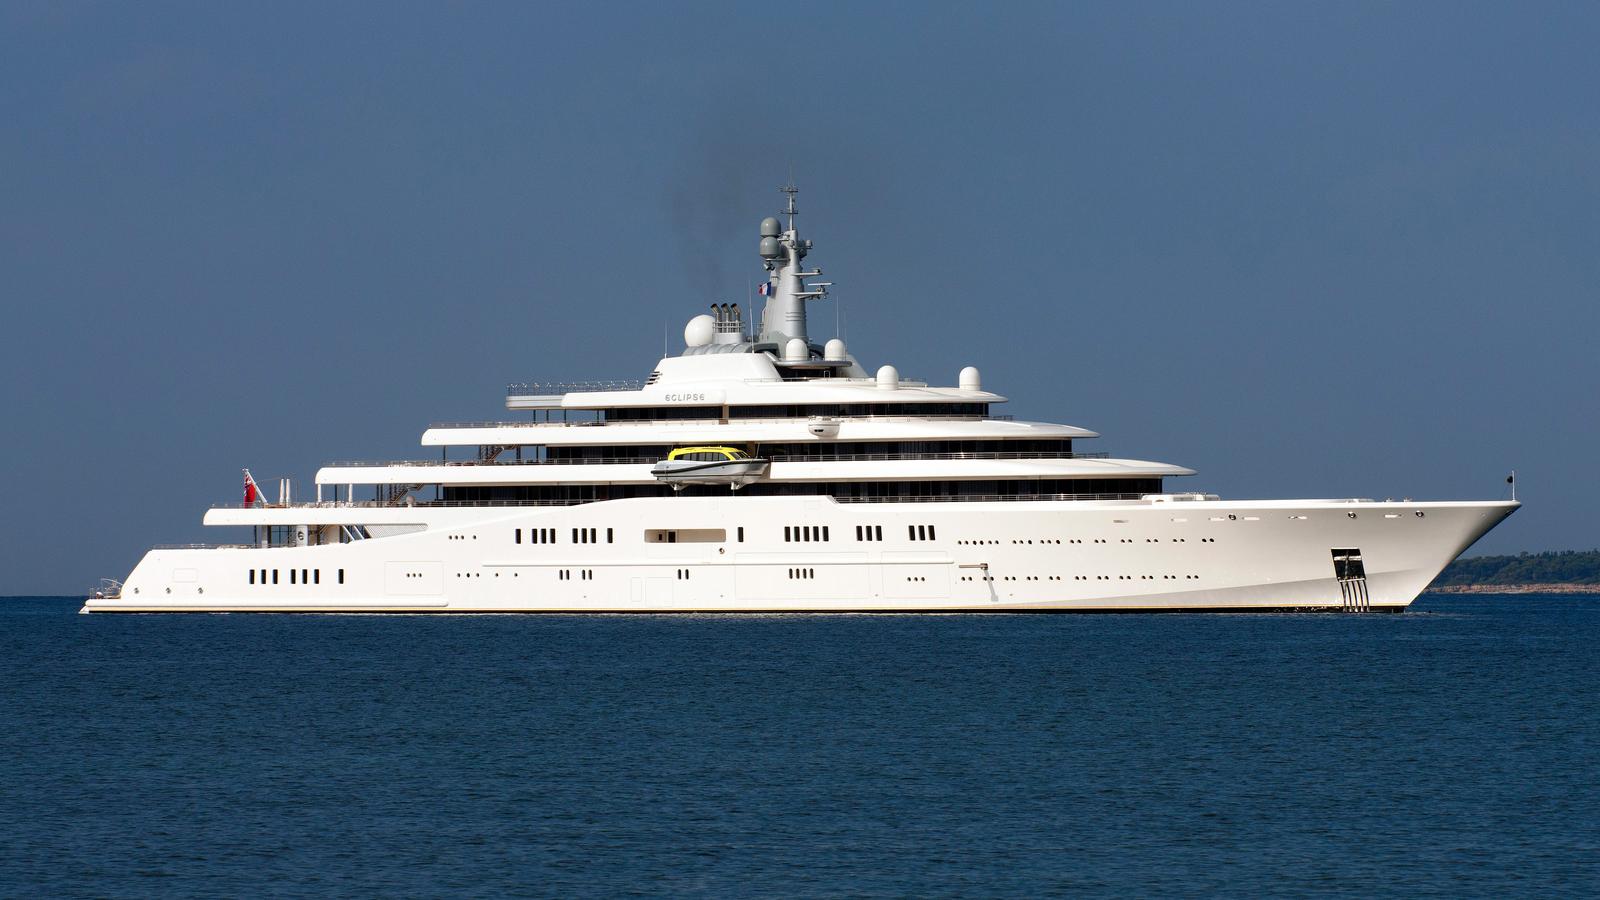 Roman Abramovich’s Eclipse Holds Its Own as World’s Most Expensive